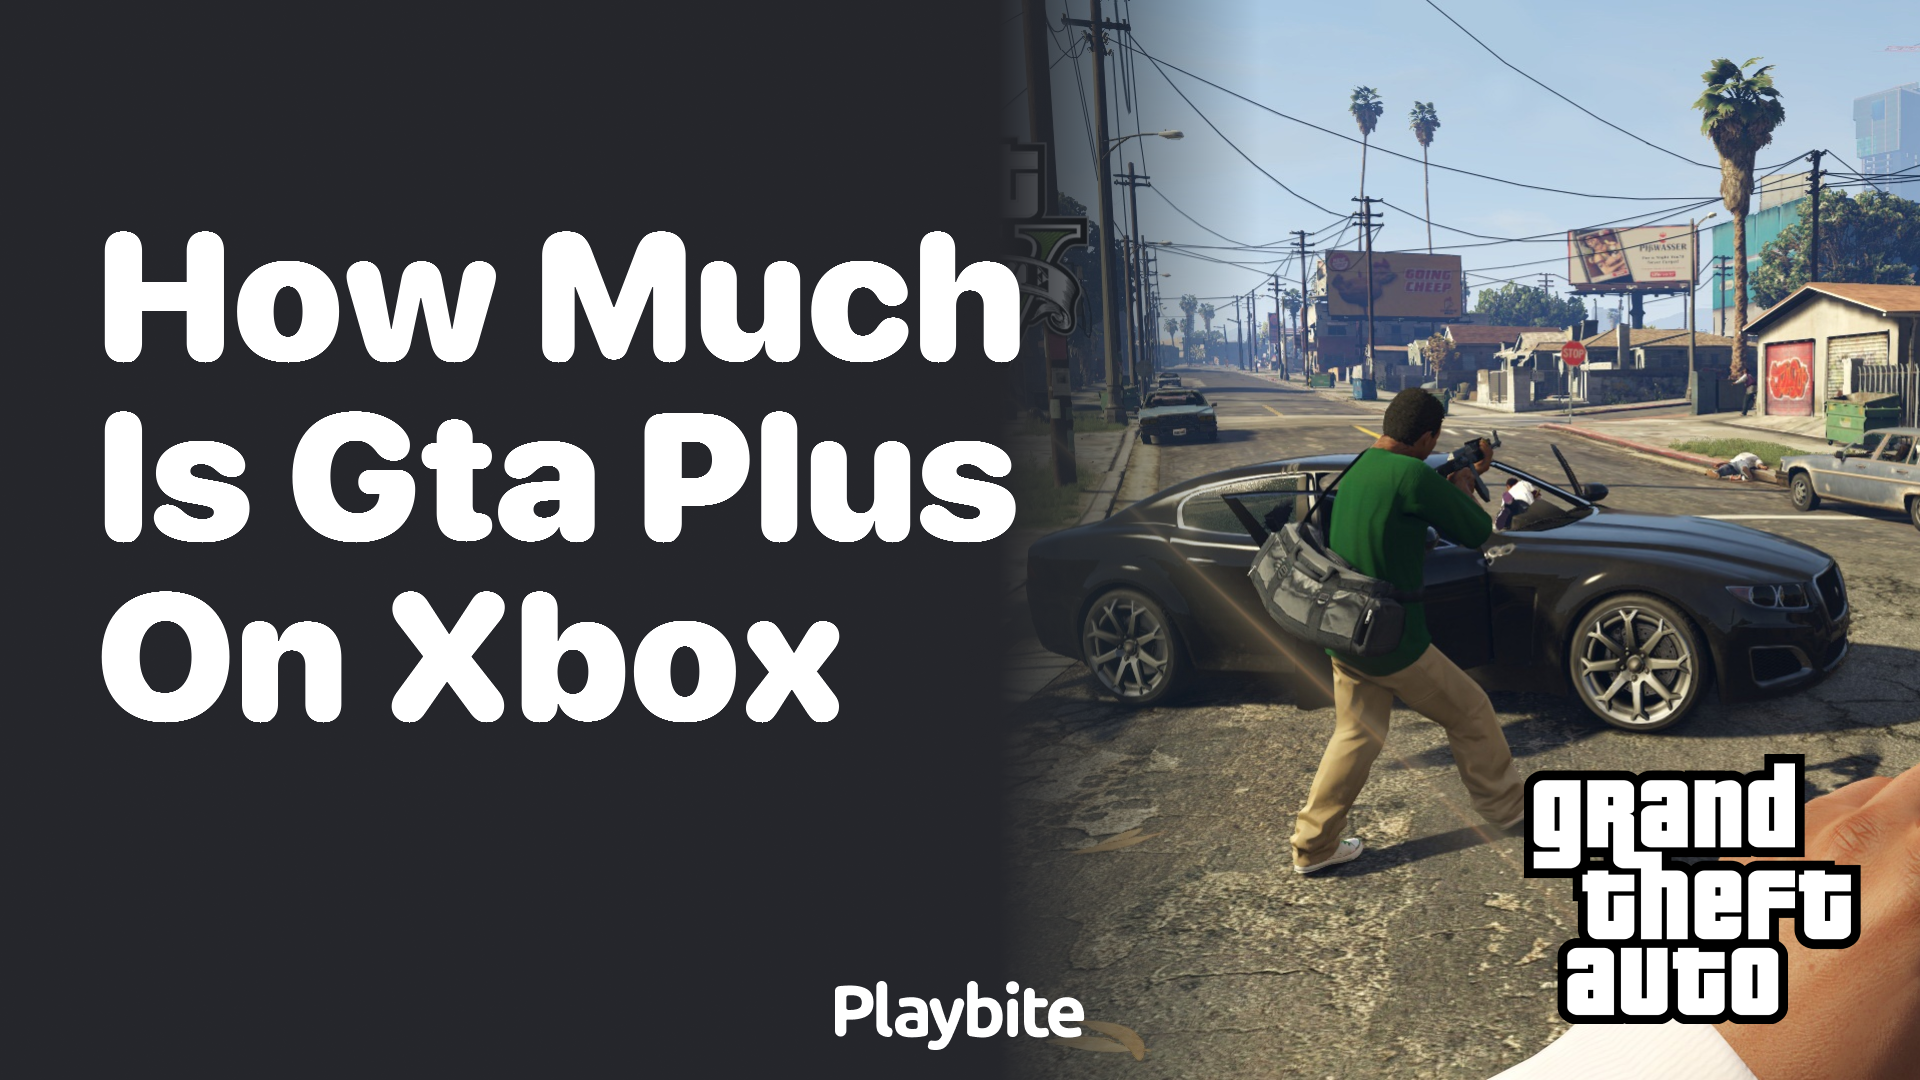 How much is GTA Plus on Xbox?